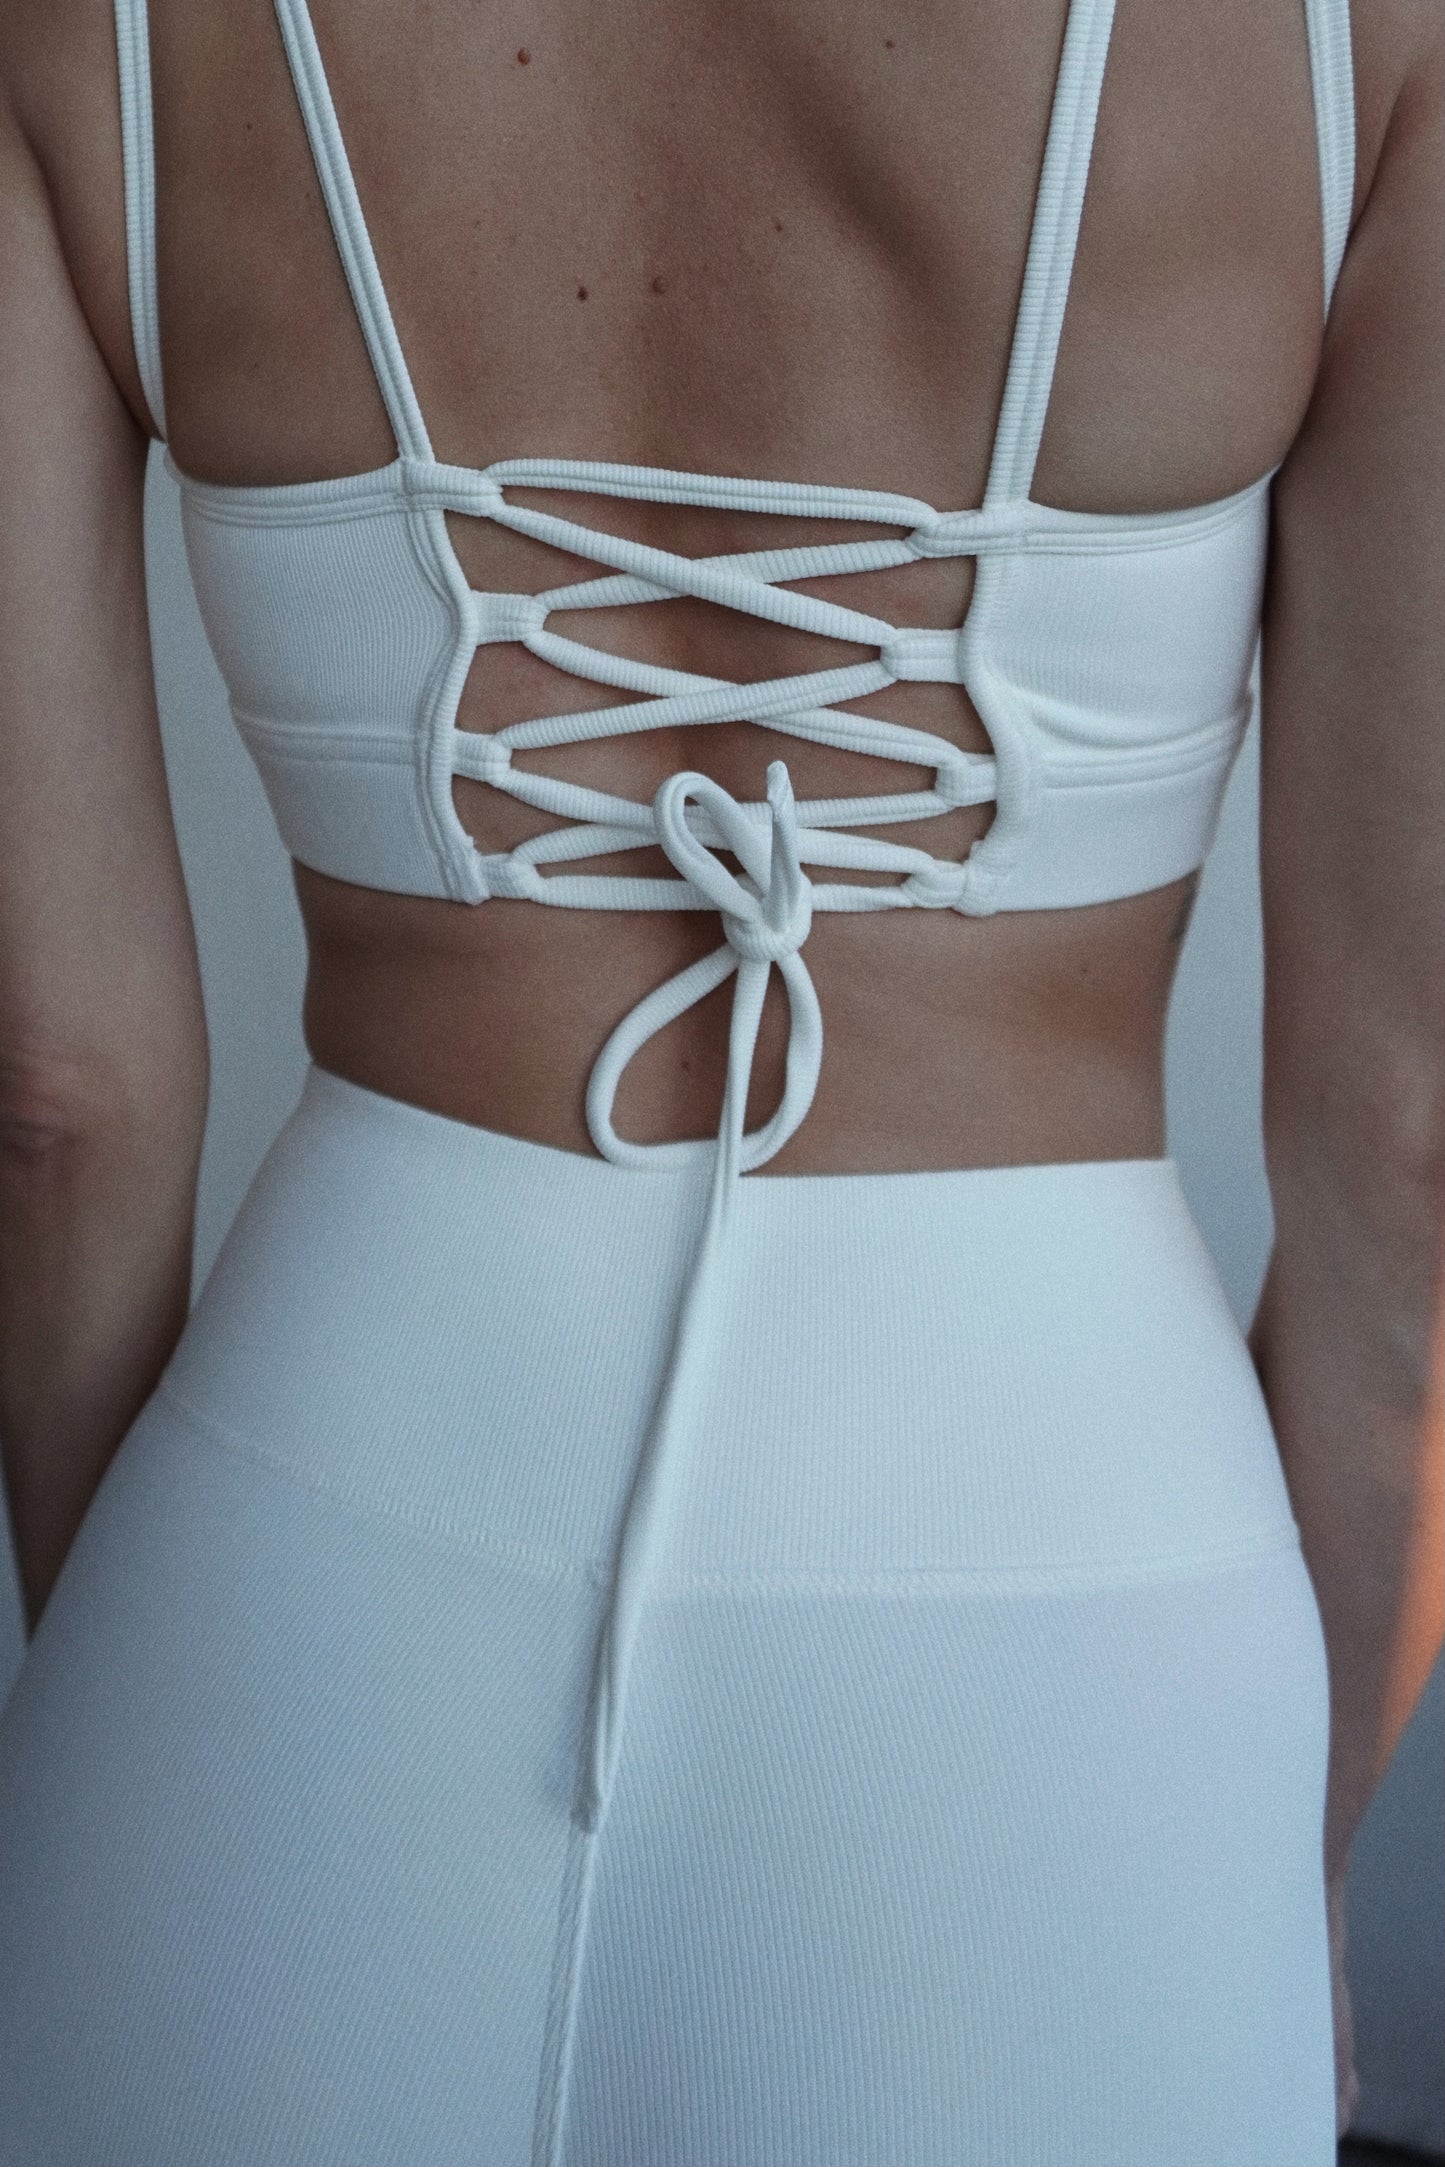 Bel Air Sporty Corset Pure White RibbedButterGlove™